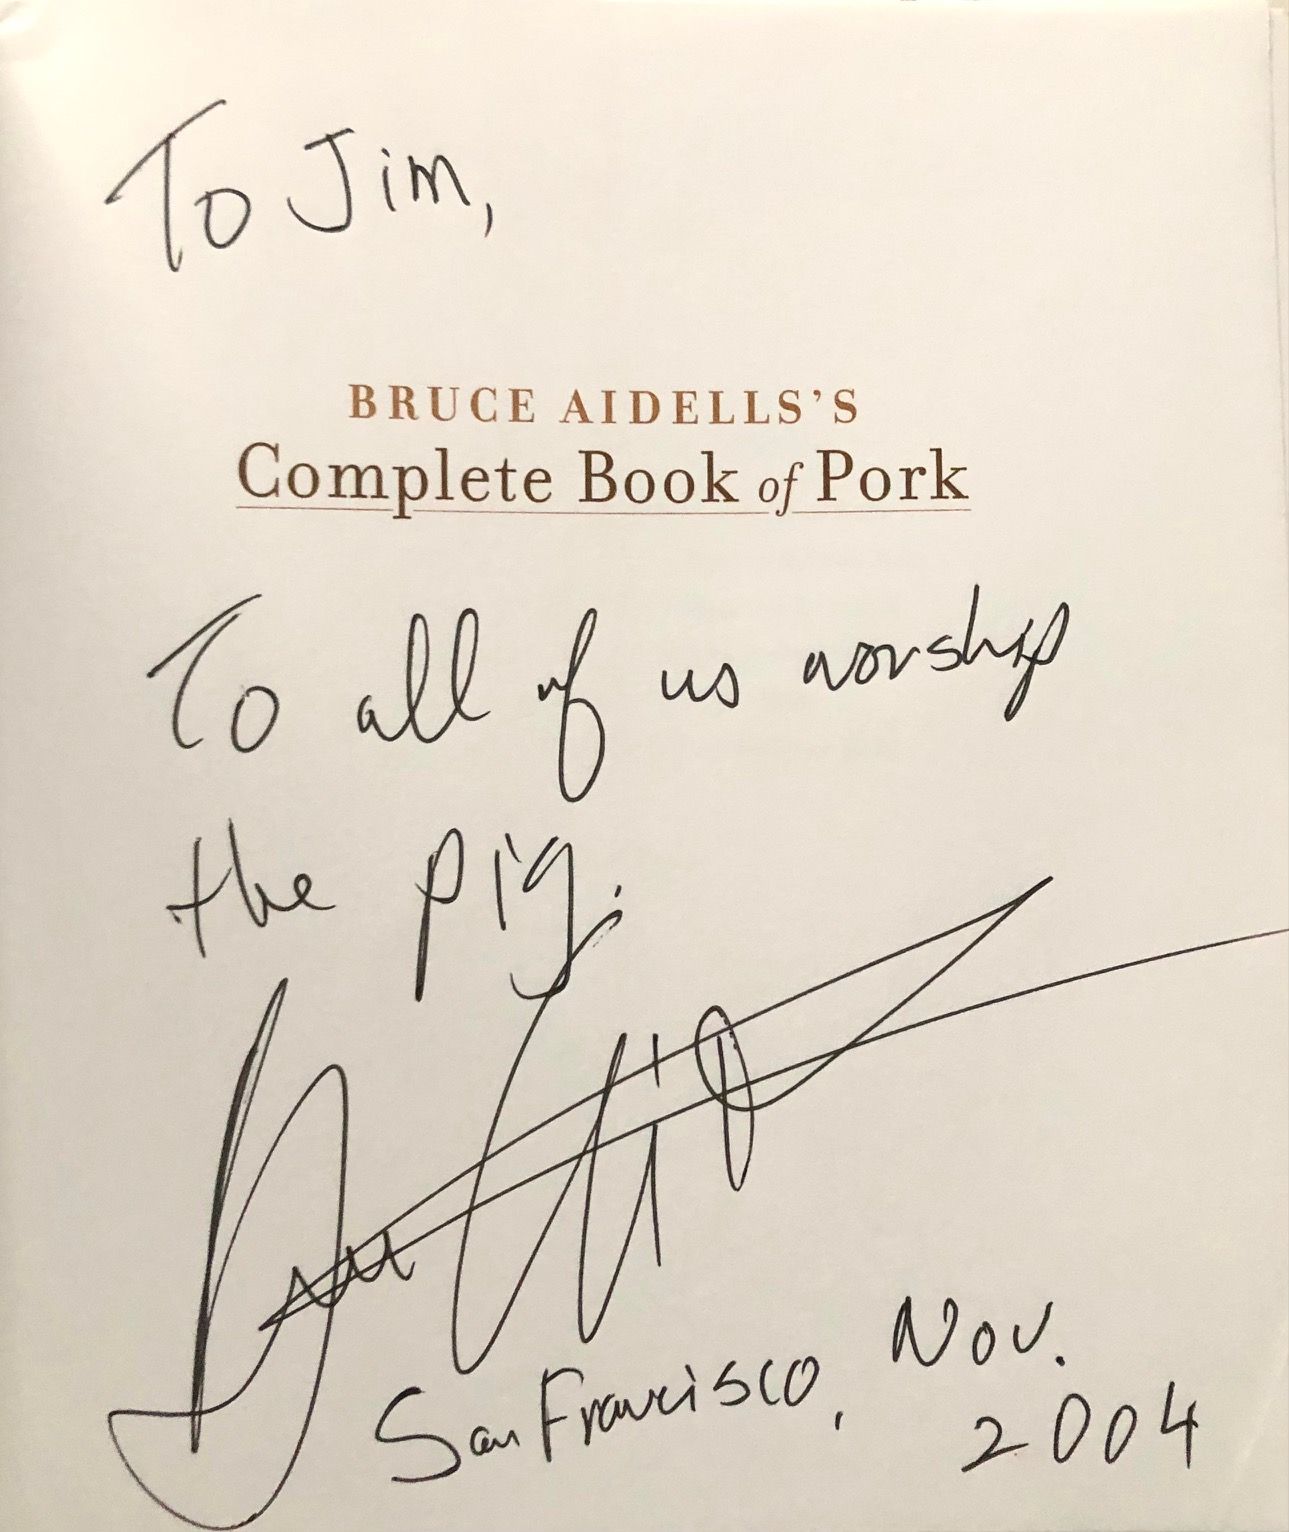 (*NEW ARRIVAL*) Bruce Aidells. Bruce Aidells's Complete Book of Pork: A Guide to Buying, Storing, and Cooking the World's Favorite Meat